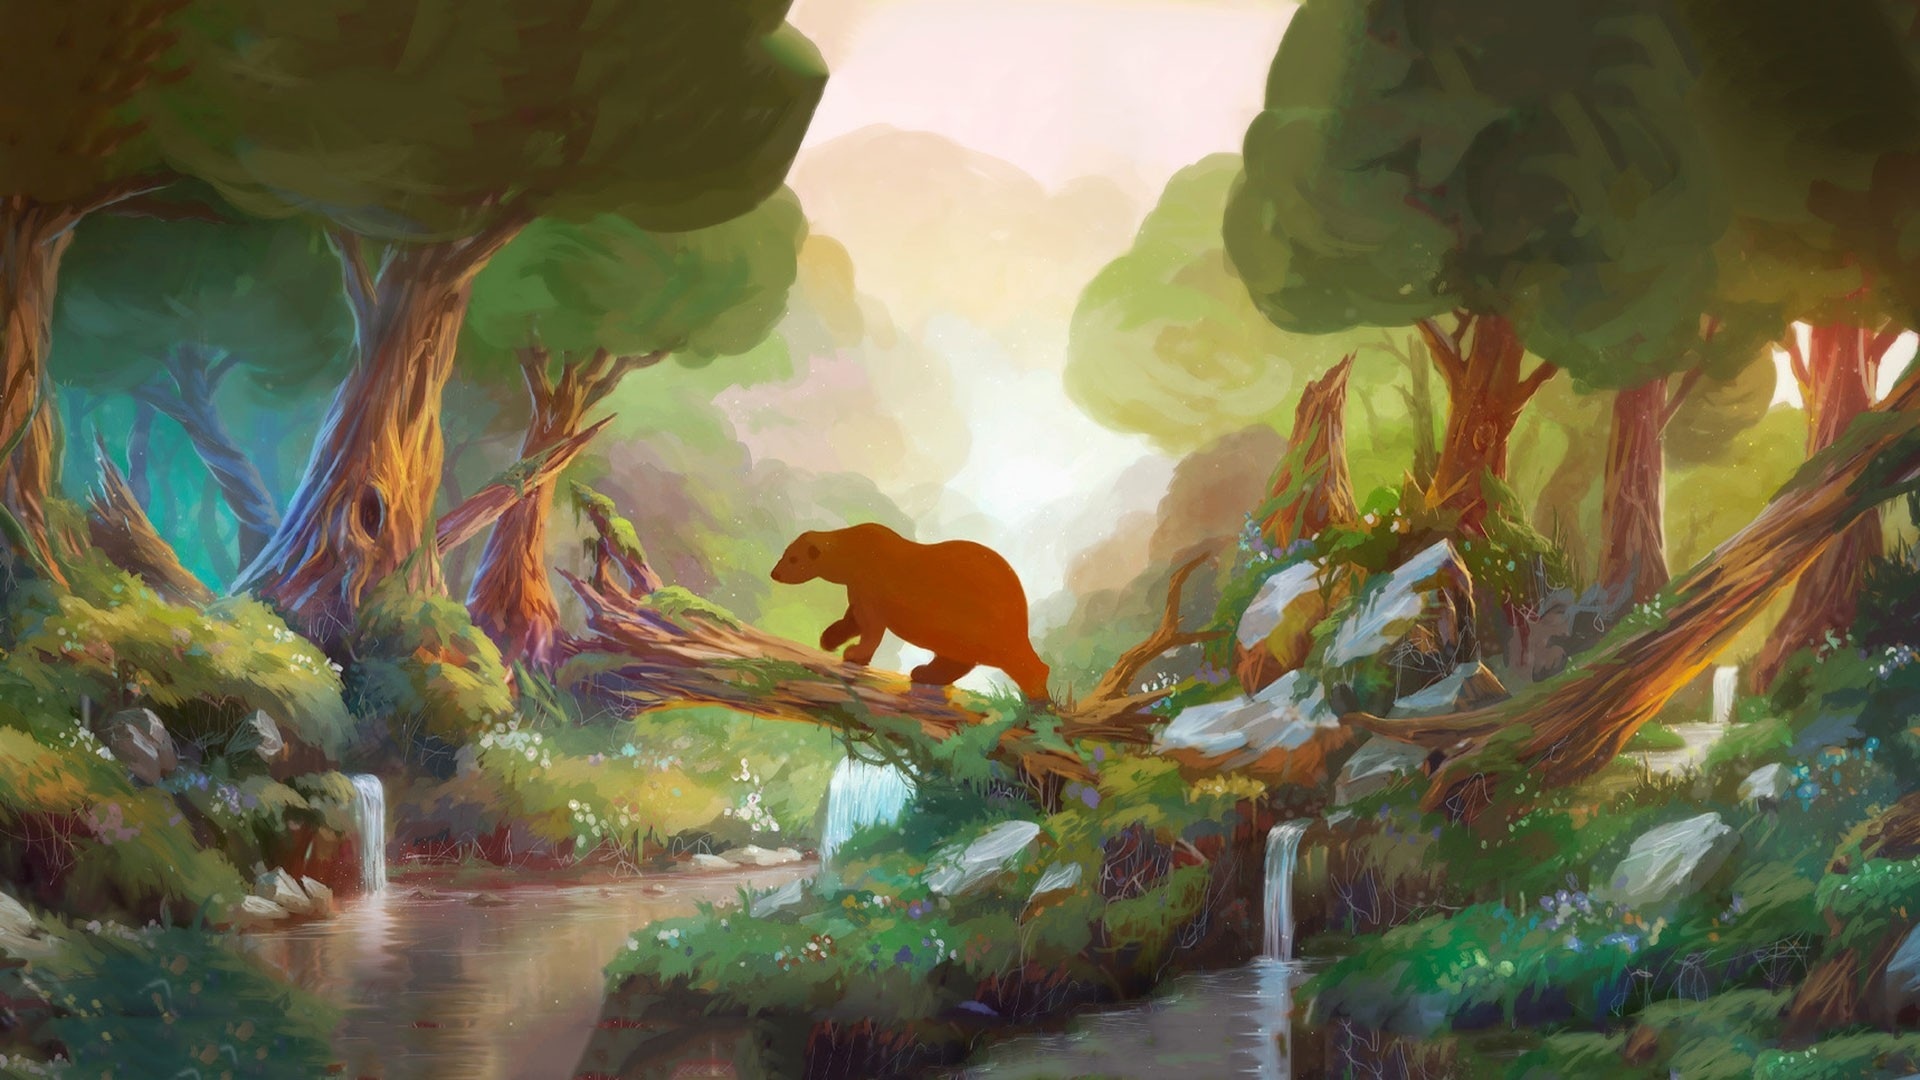 Anime cartoon fantasy children kids art paintings animals bears nature trees forest rivers stream waterfall sunlight soft wallpapers hd desktop and mobile backgrounds